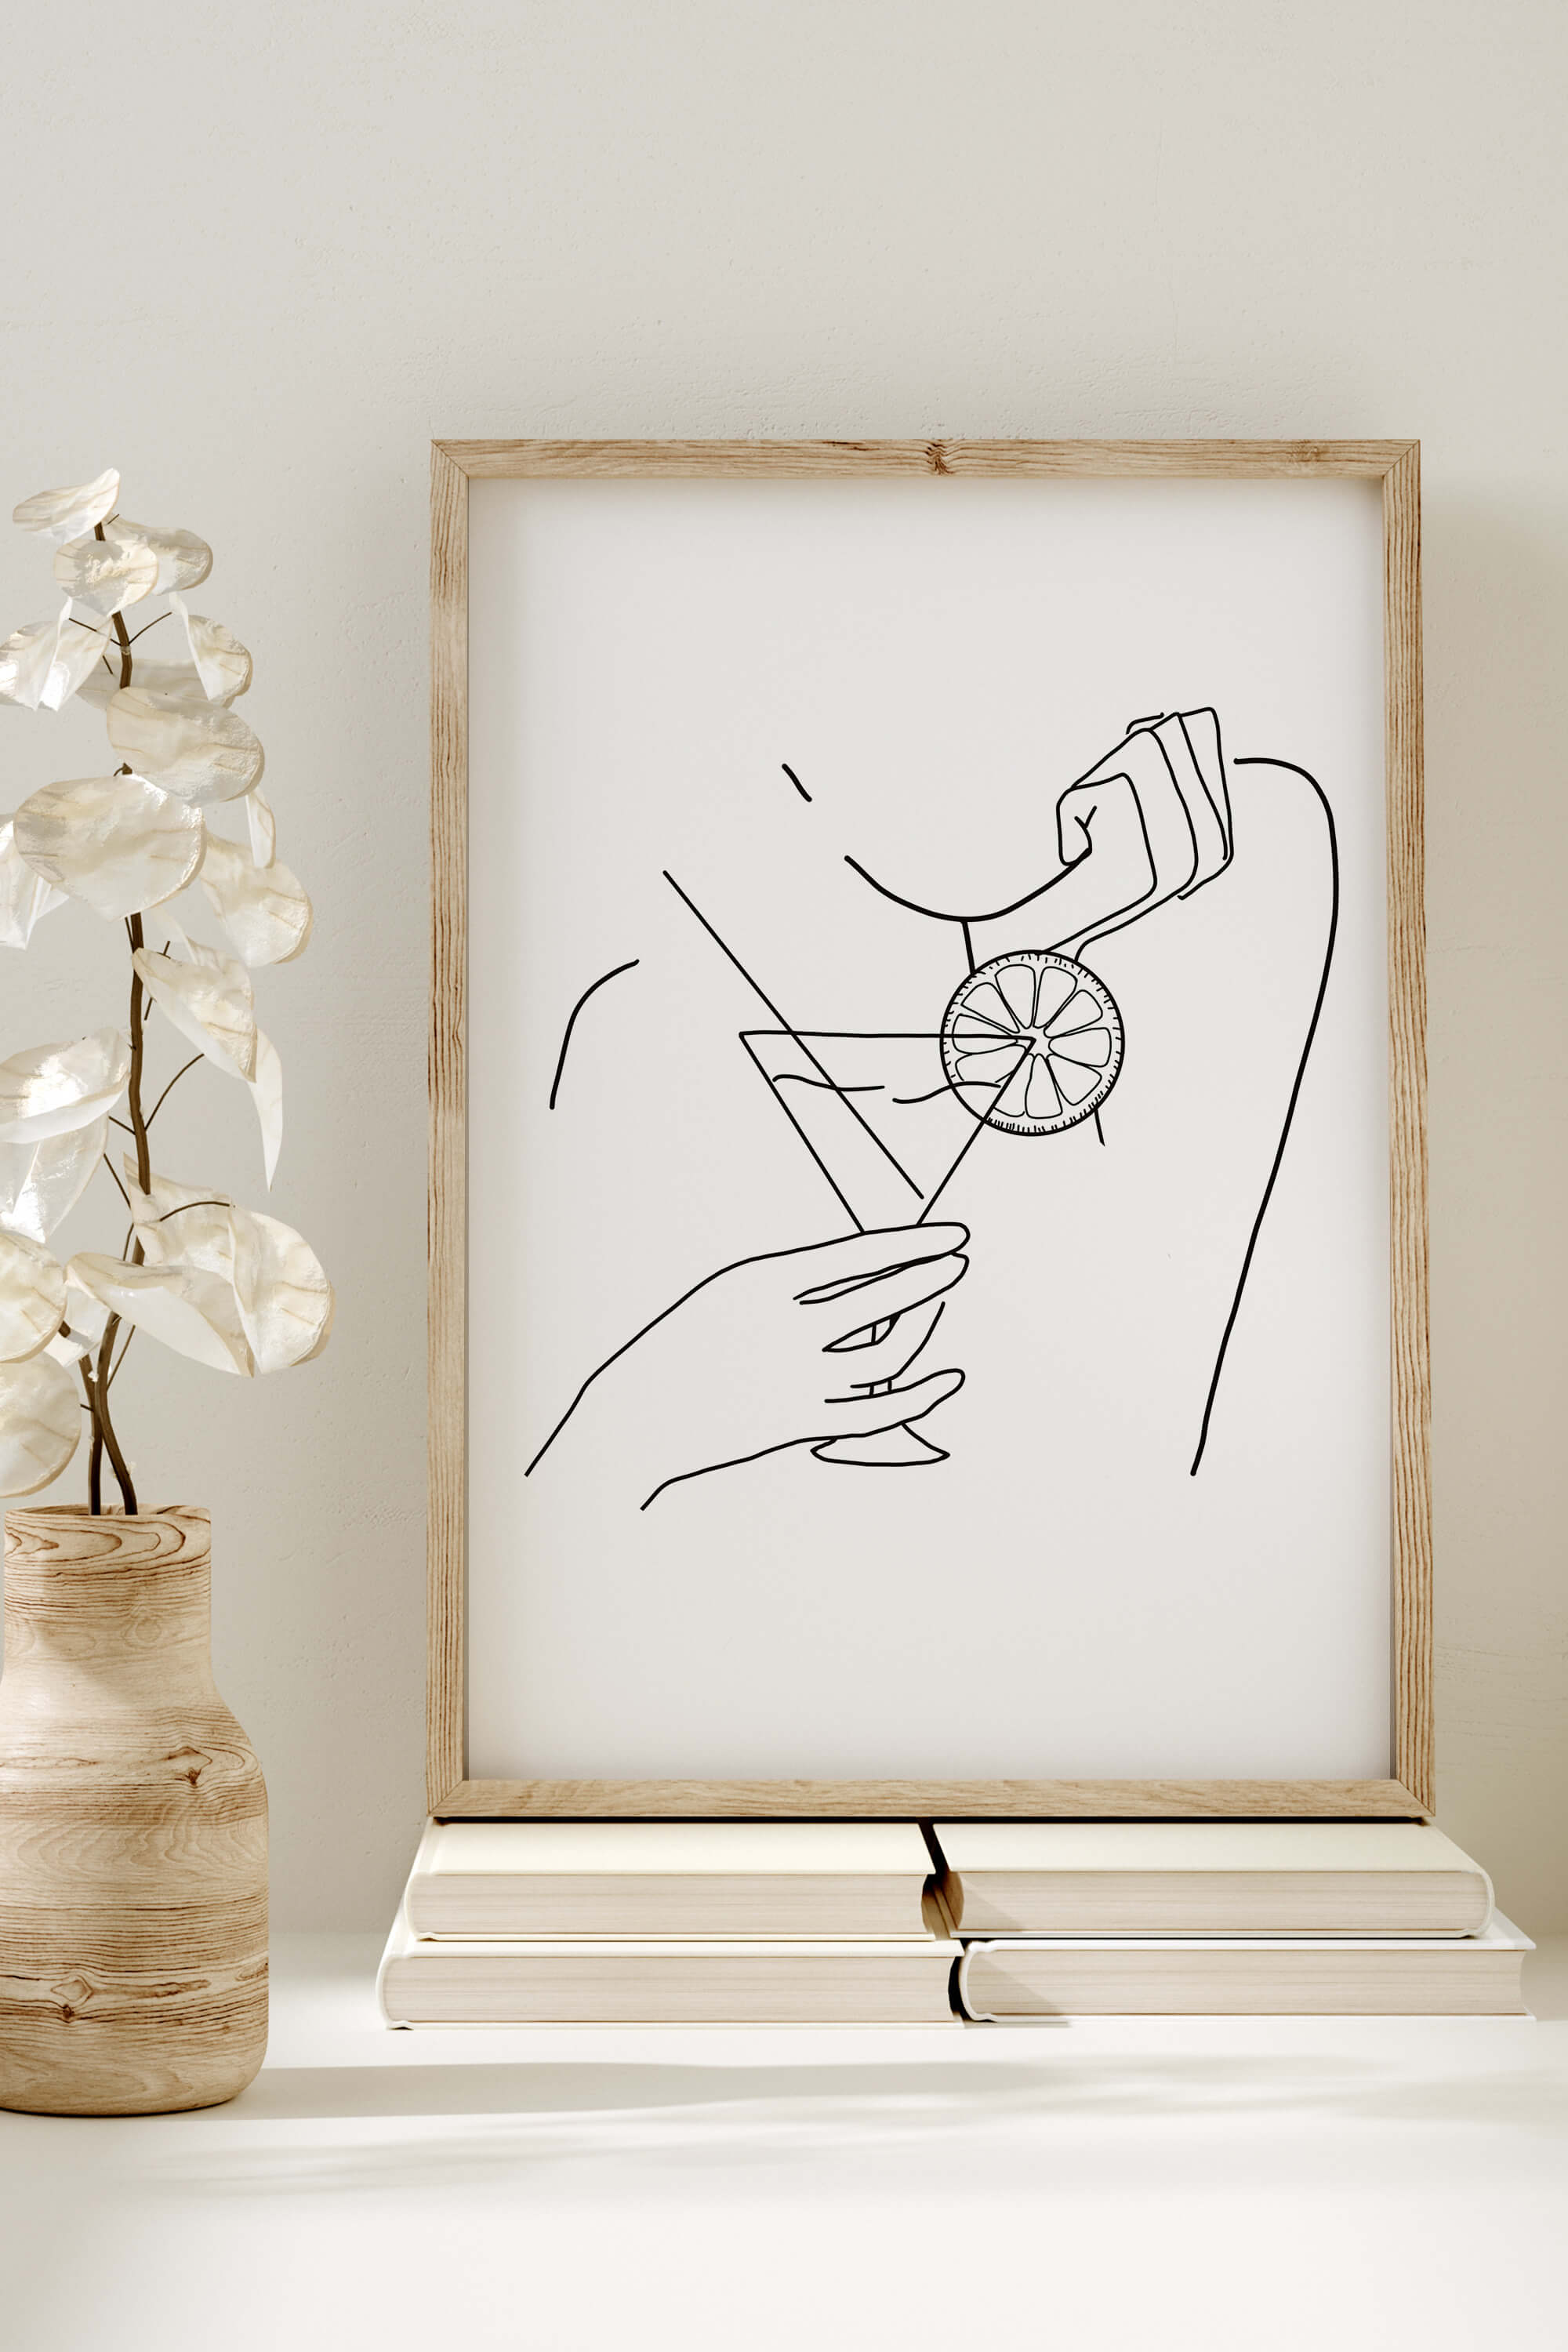 Transform your bar cart into a masterpiece with our monochrome elegance art print. The black-and-white theme exudes timeless appeal, making it an exquisite addition to your bar cart decor. Make a statement with every sip.